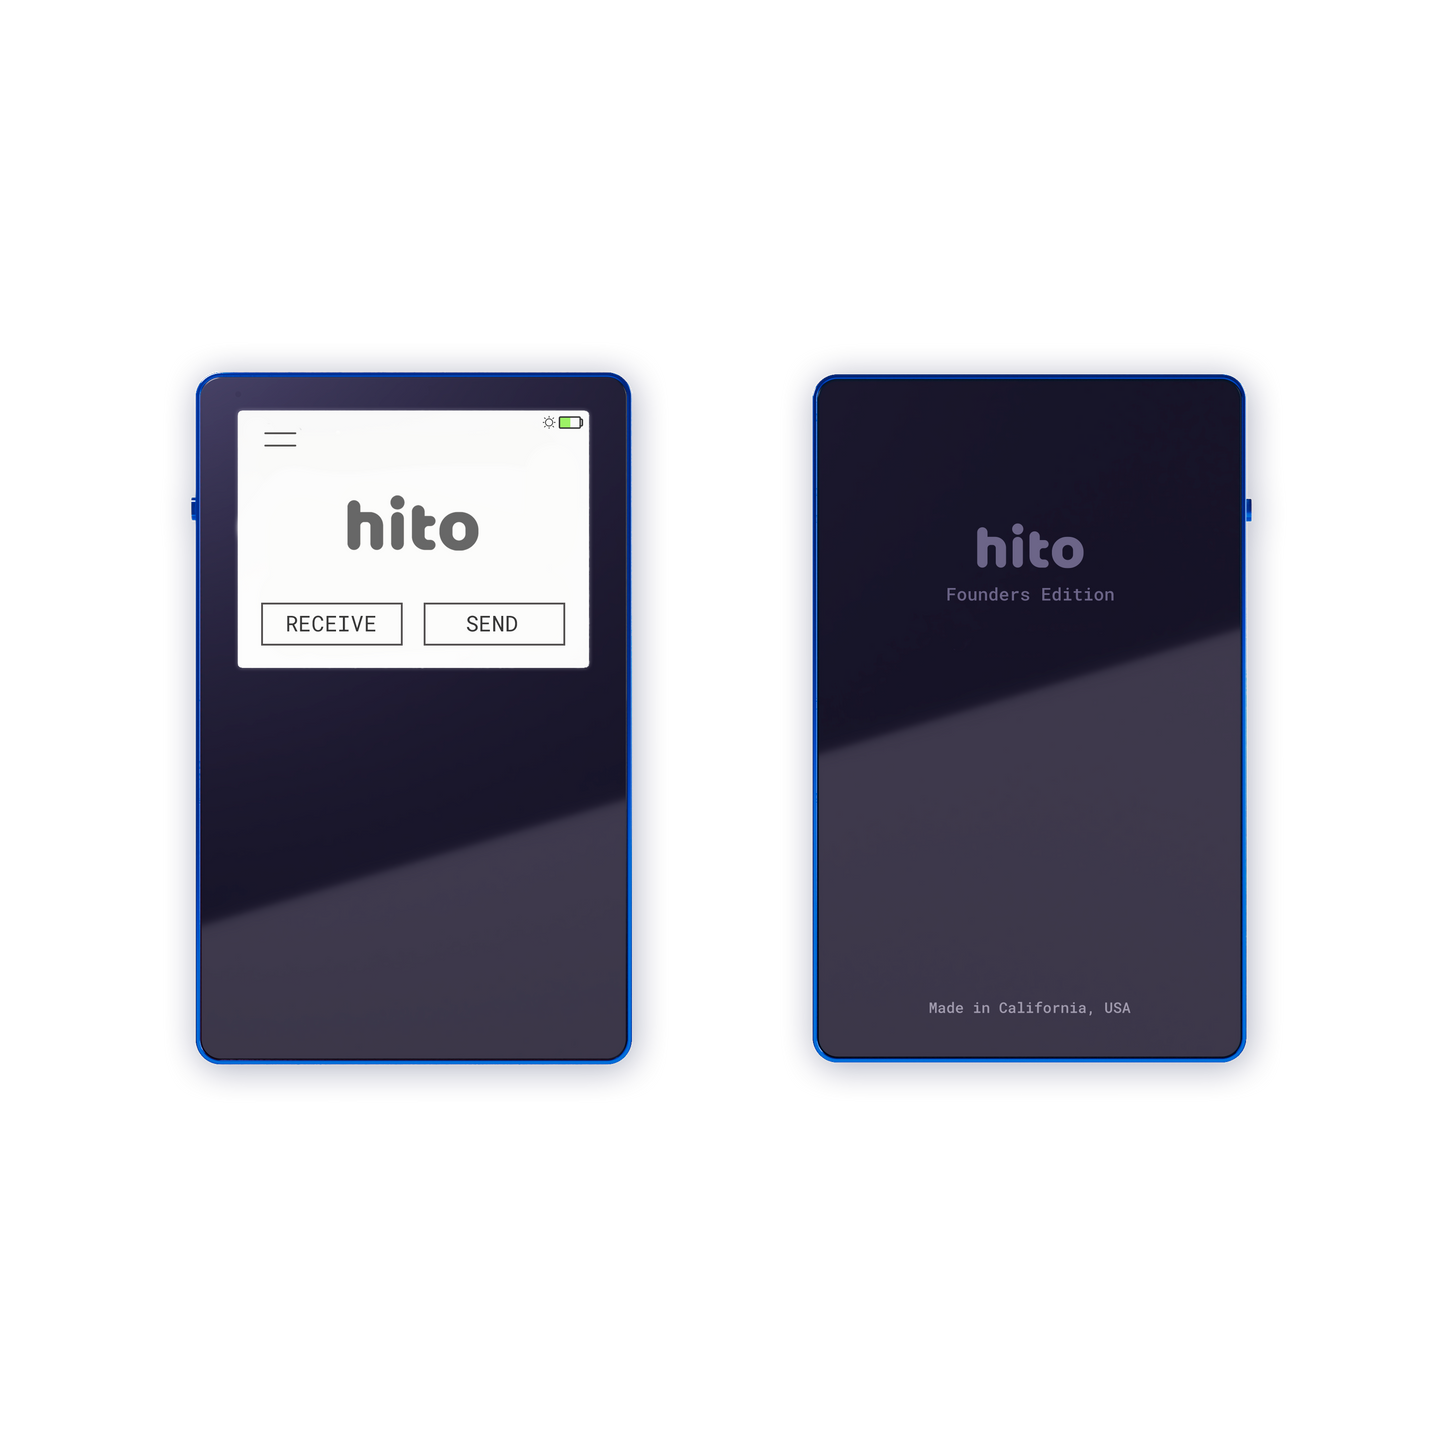 Hito Founders Edition